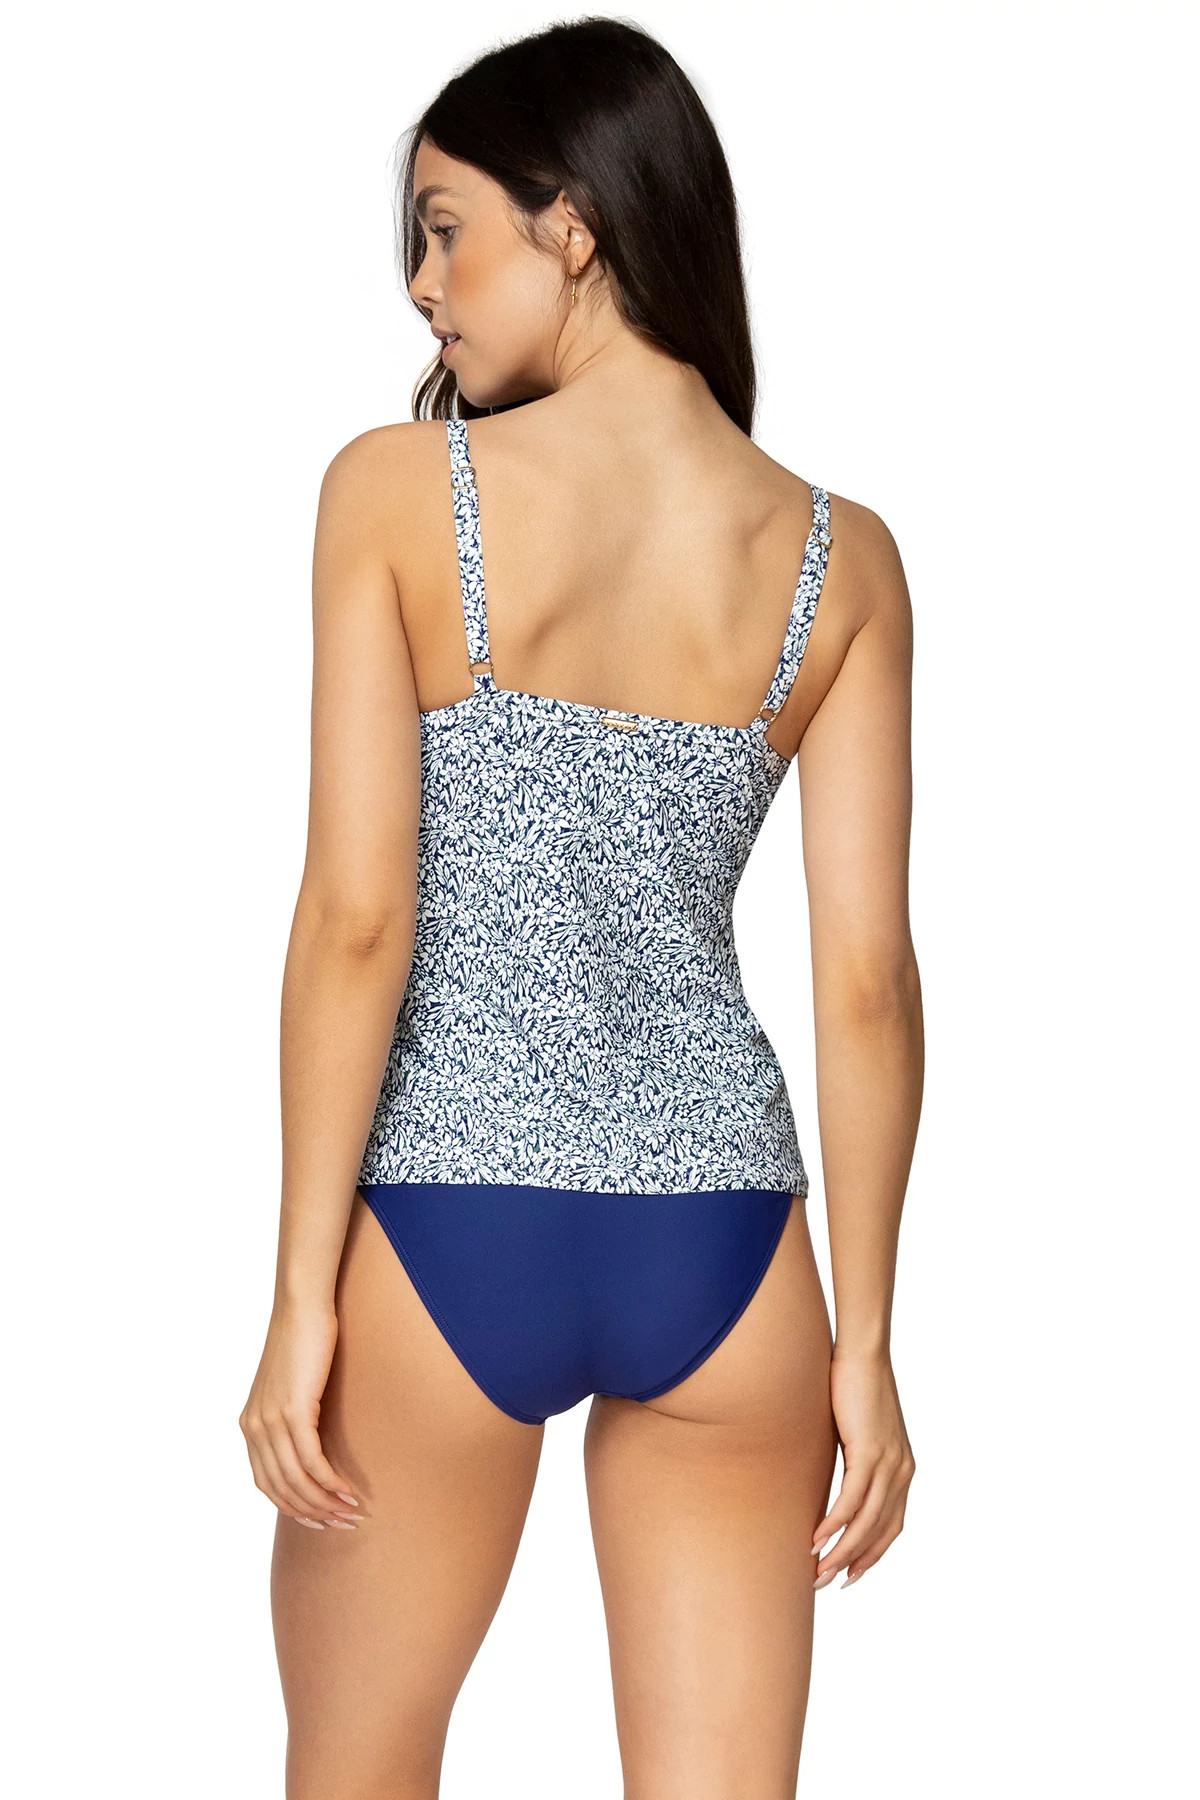 FORGET ME NOT Forever Underwire Bra Tankini Top (D+ Cup) image number 2